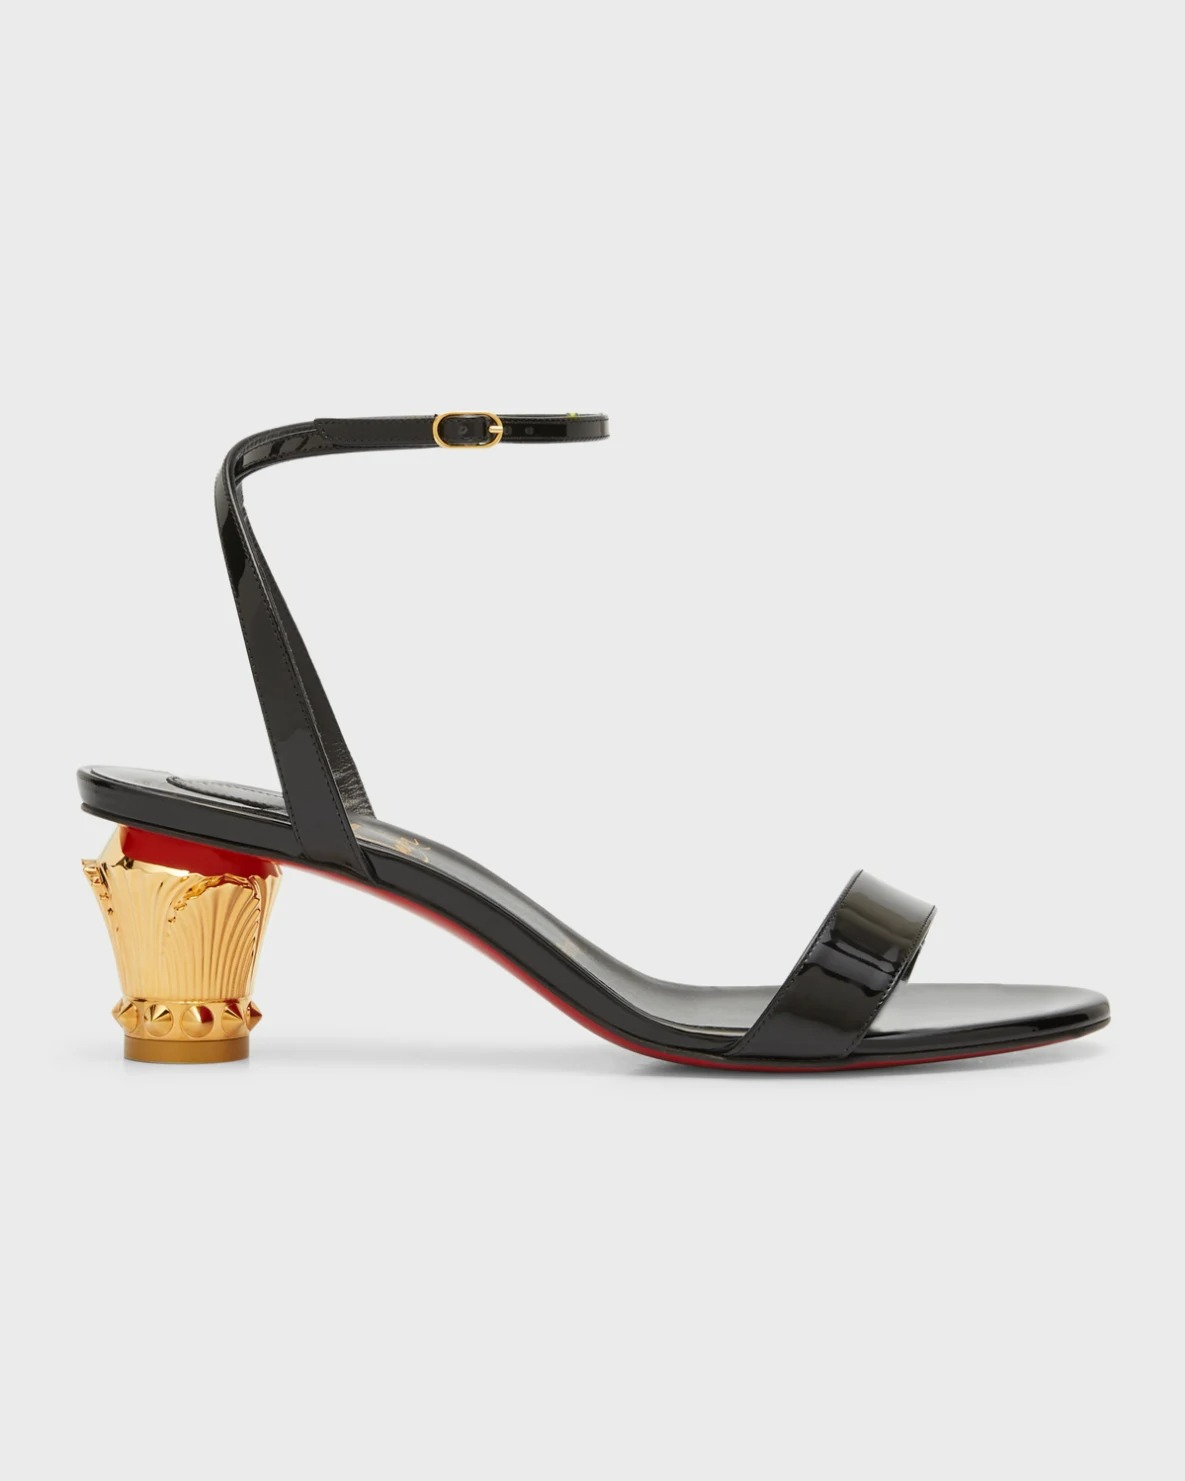 Christian Louboutin Lipsita Queen Patent Red Sole Sandals